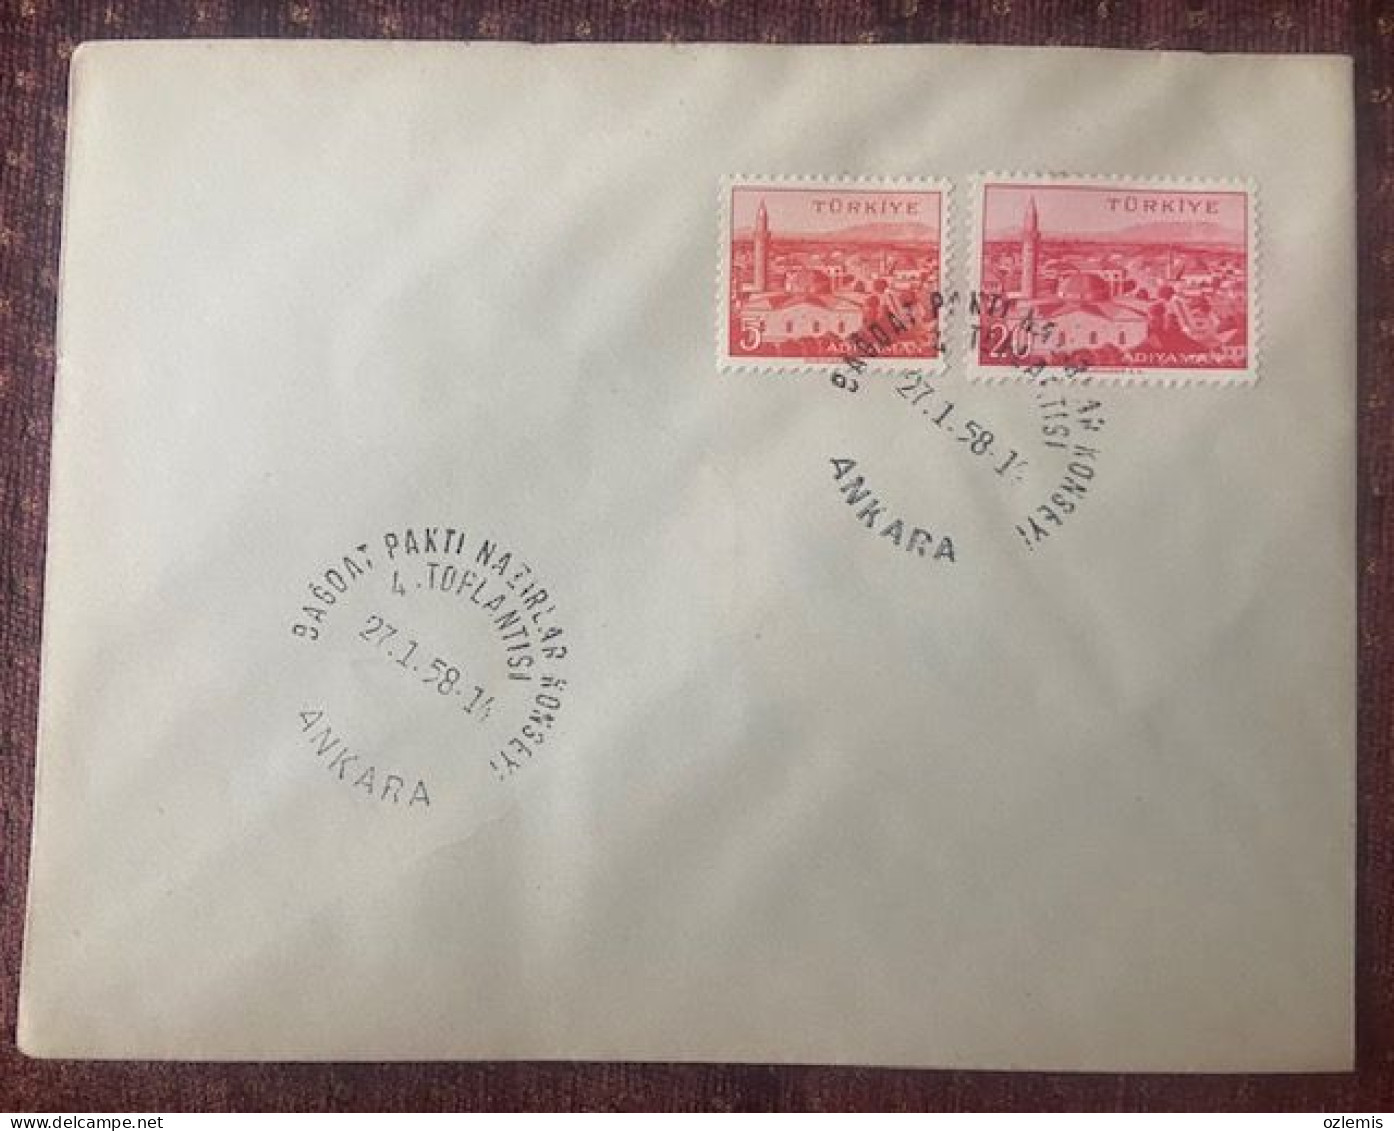 TURKEY,TURKEI,TURQUIE ,ADIYAMAN ,STAMP,THE 4TH MEETING OF THE BAGDAT PACT ,1958 ,COVER - Lettres & Documents